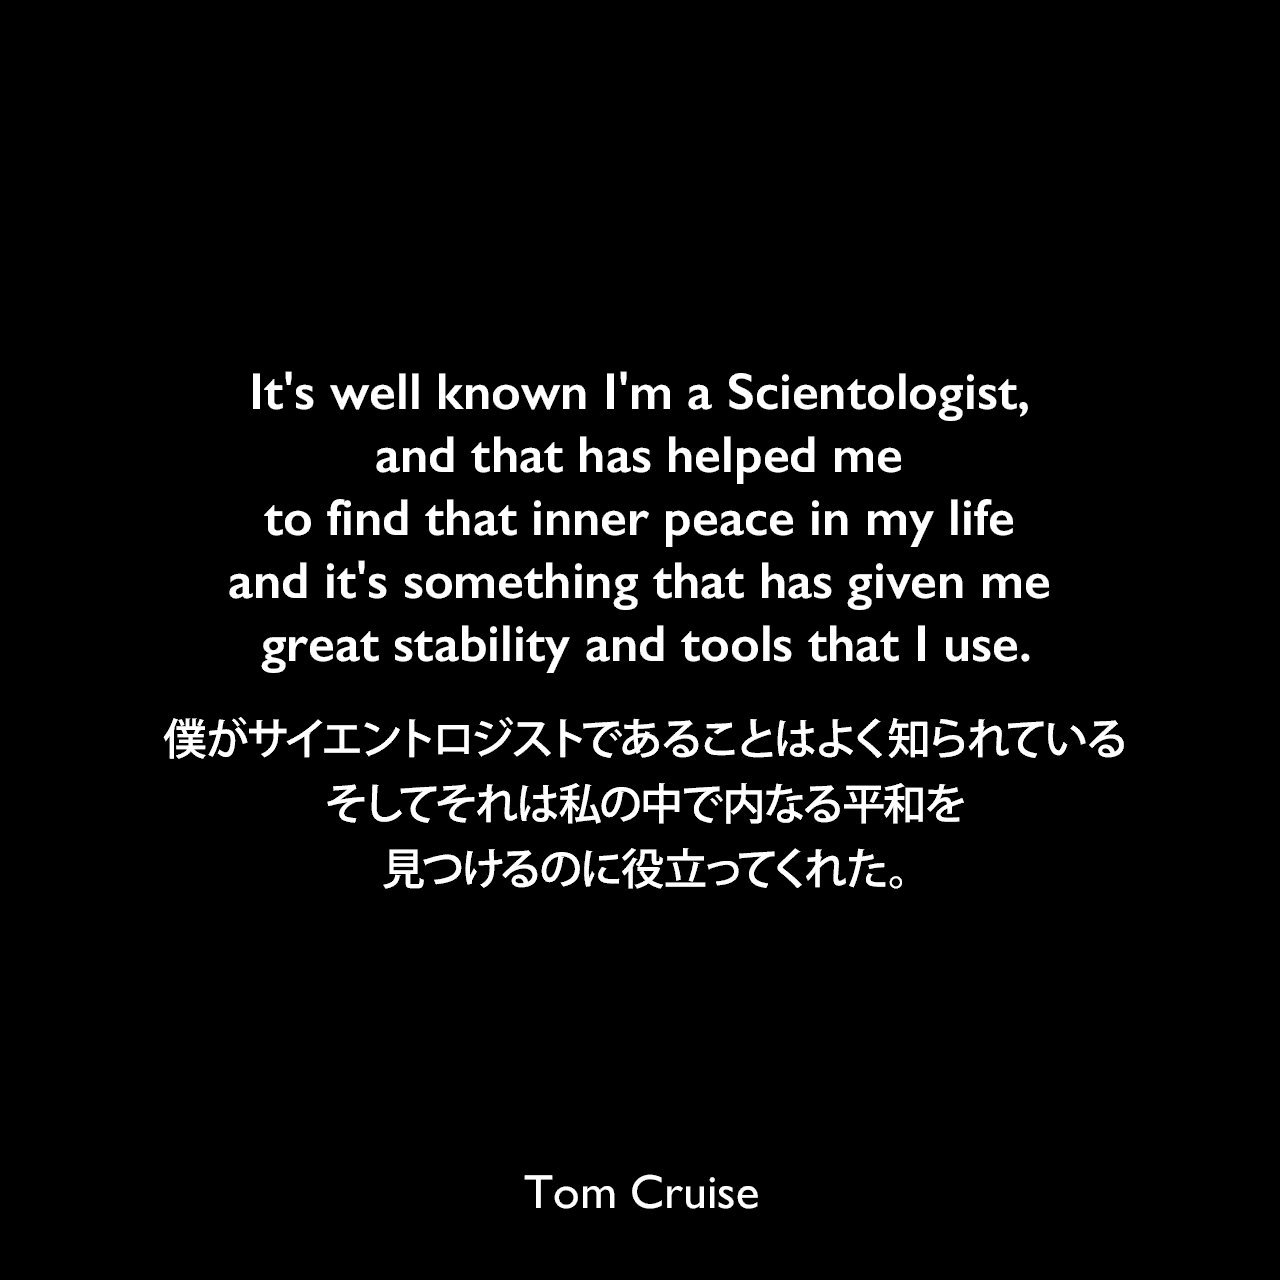 It's well known I'm a Scientologist, and that has helped me to find that inner peace in my life and it's something that has given me great stability and tools that I use.僕がサイエントロジストであることはよく知られている、そしてそれは私の中で内なる平和を見つけるのに役立ってくれた。Tom Cruise